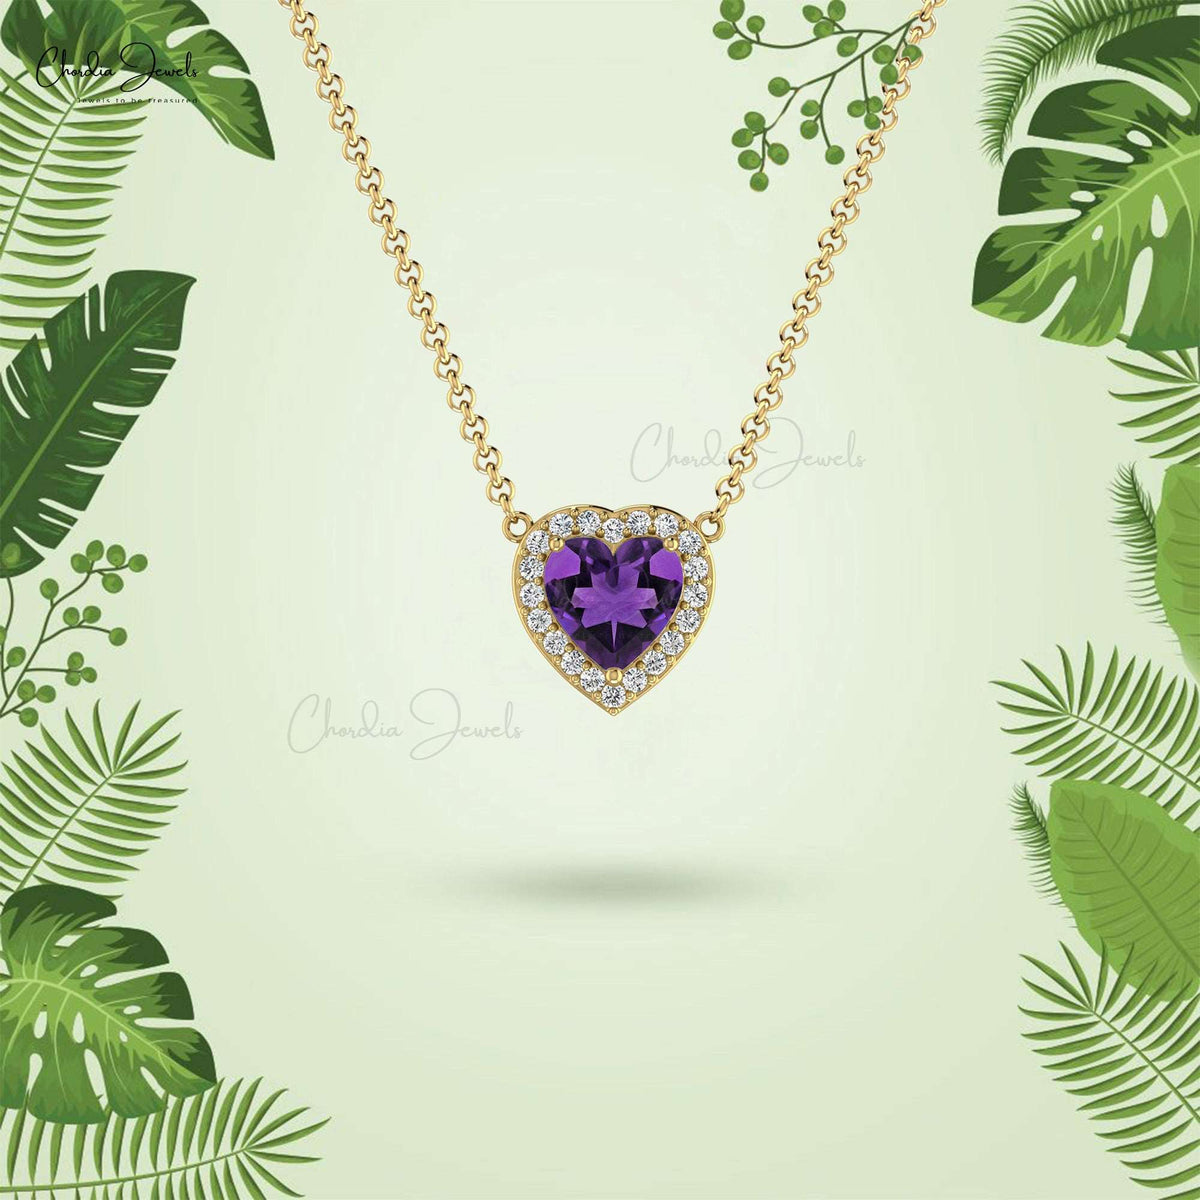 14k Solid Gold Diamond and Amethyst Necklace, February